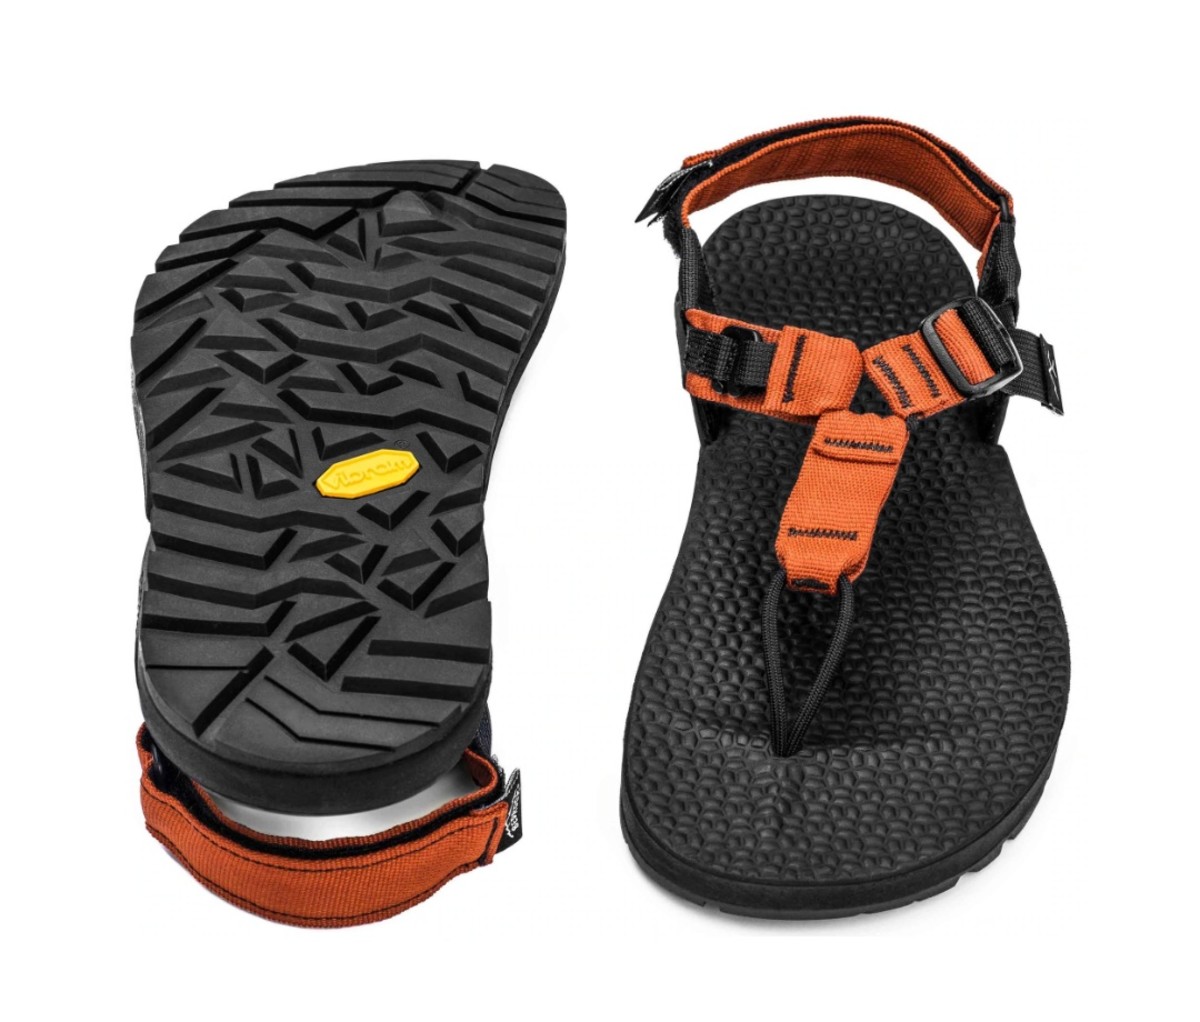 Bedrock Cairn 3D Adventure Sandals in orange on a white background. Mother's Day gifts.